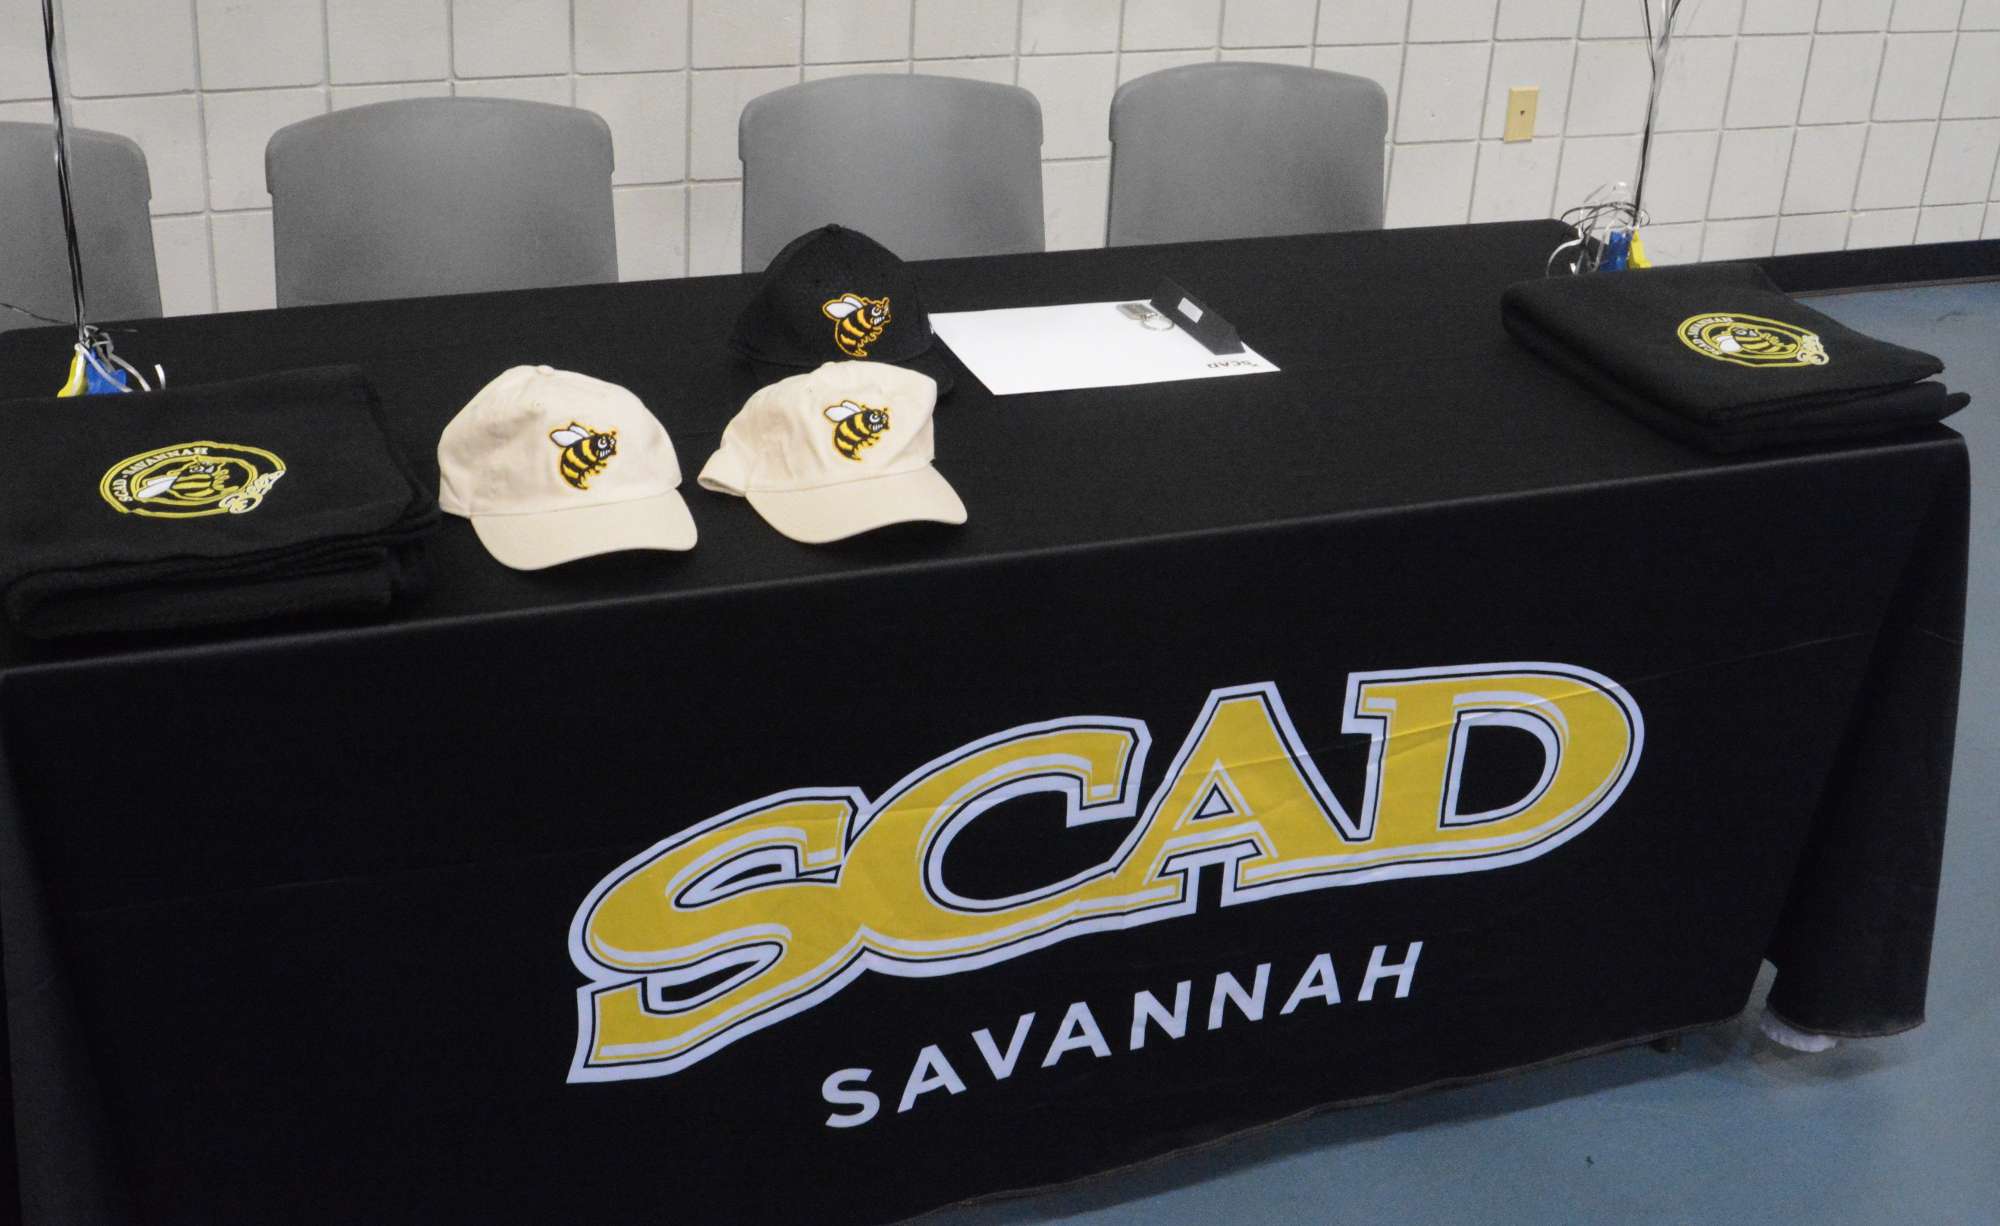 The stage is set for the SCAD Fishing Team's announcement.